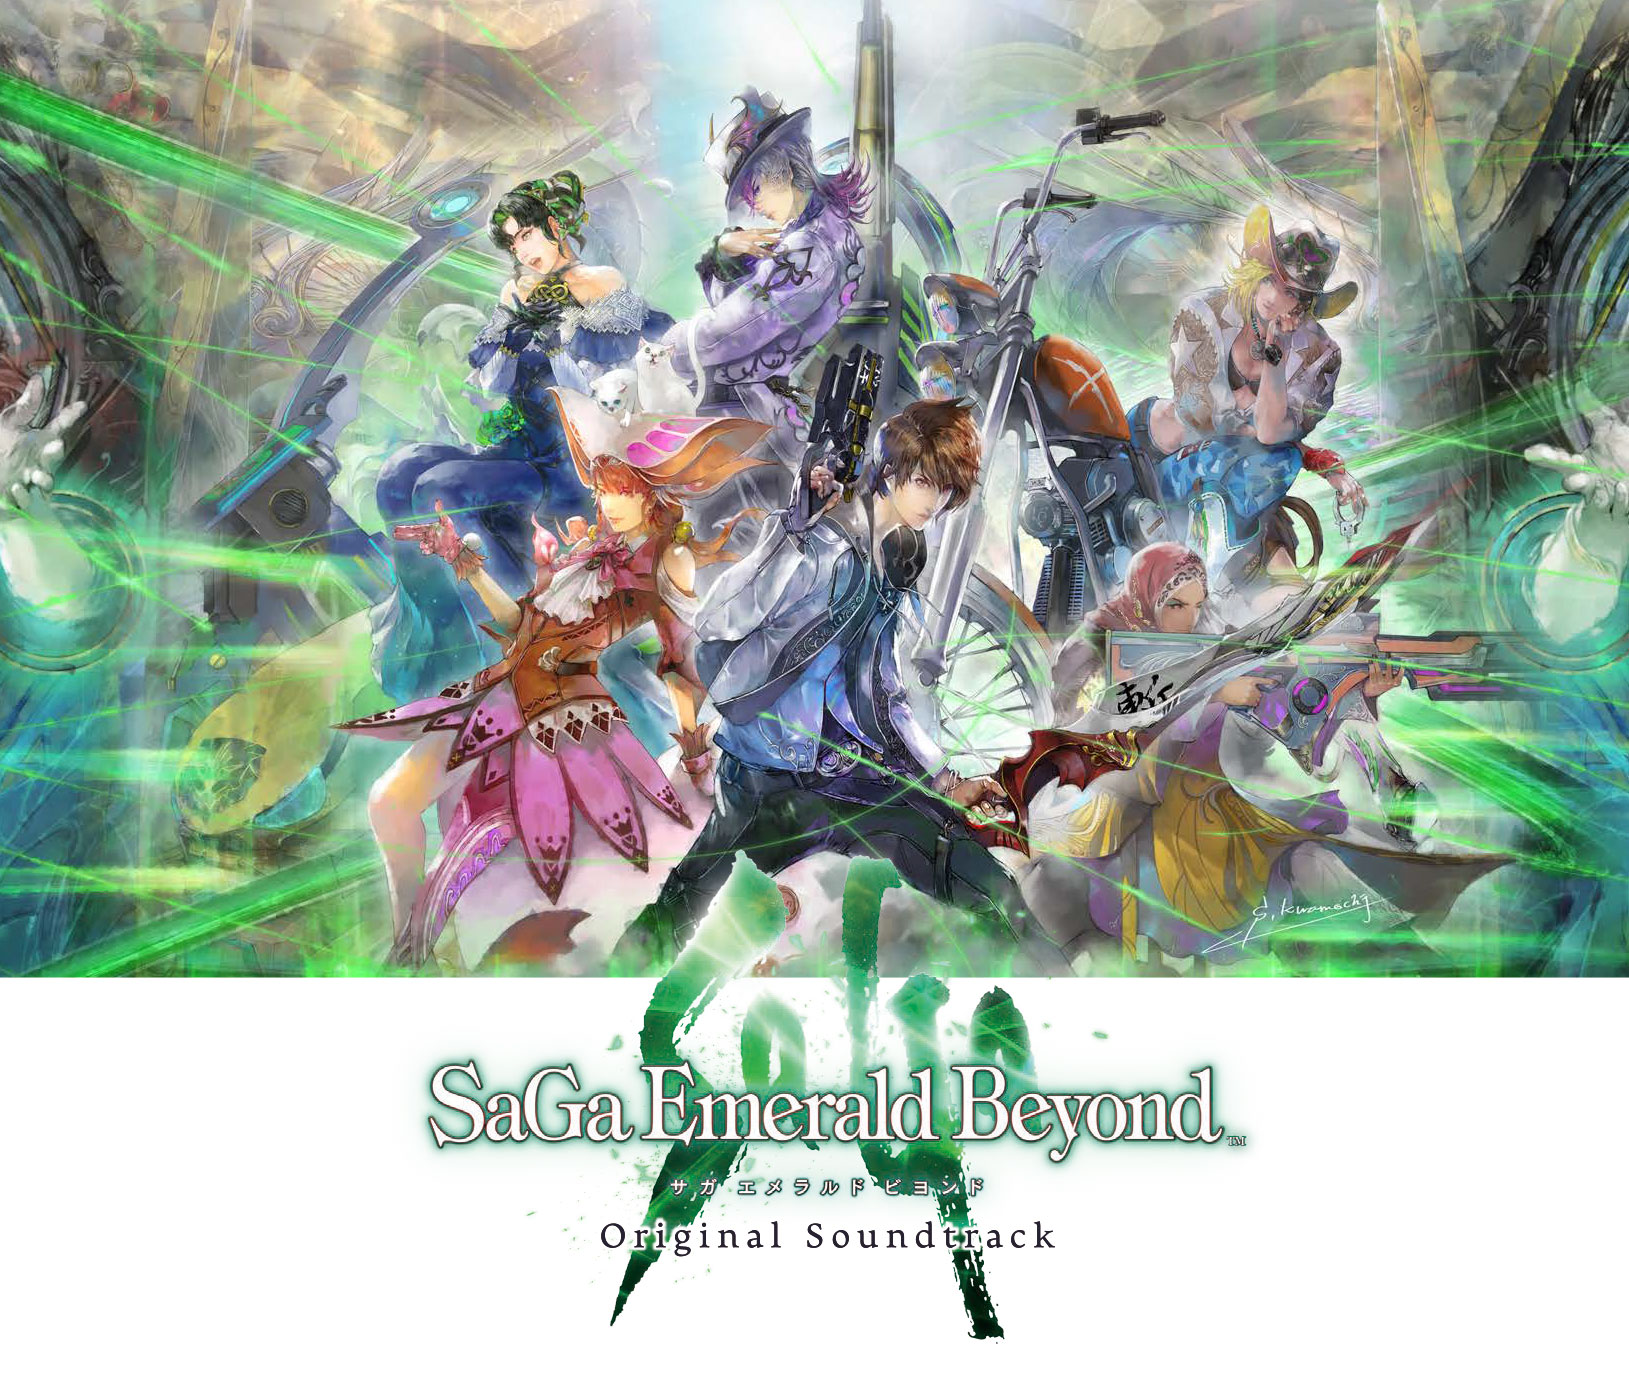 The ‘SaGa Emerald Beyond’ Original Soundtrack Composed by Kenji Ito Releases on May 1st, a Week After the Game Launches on Mobile and Mobile